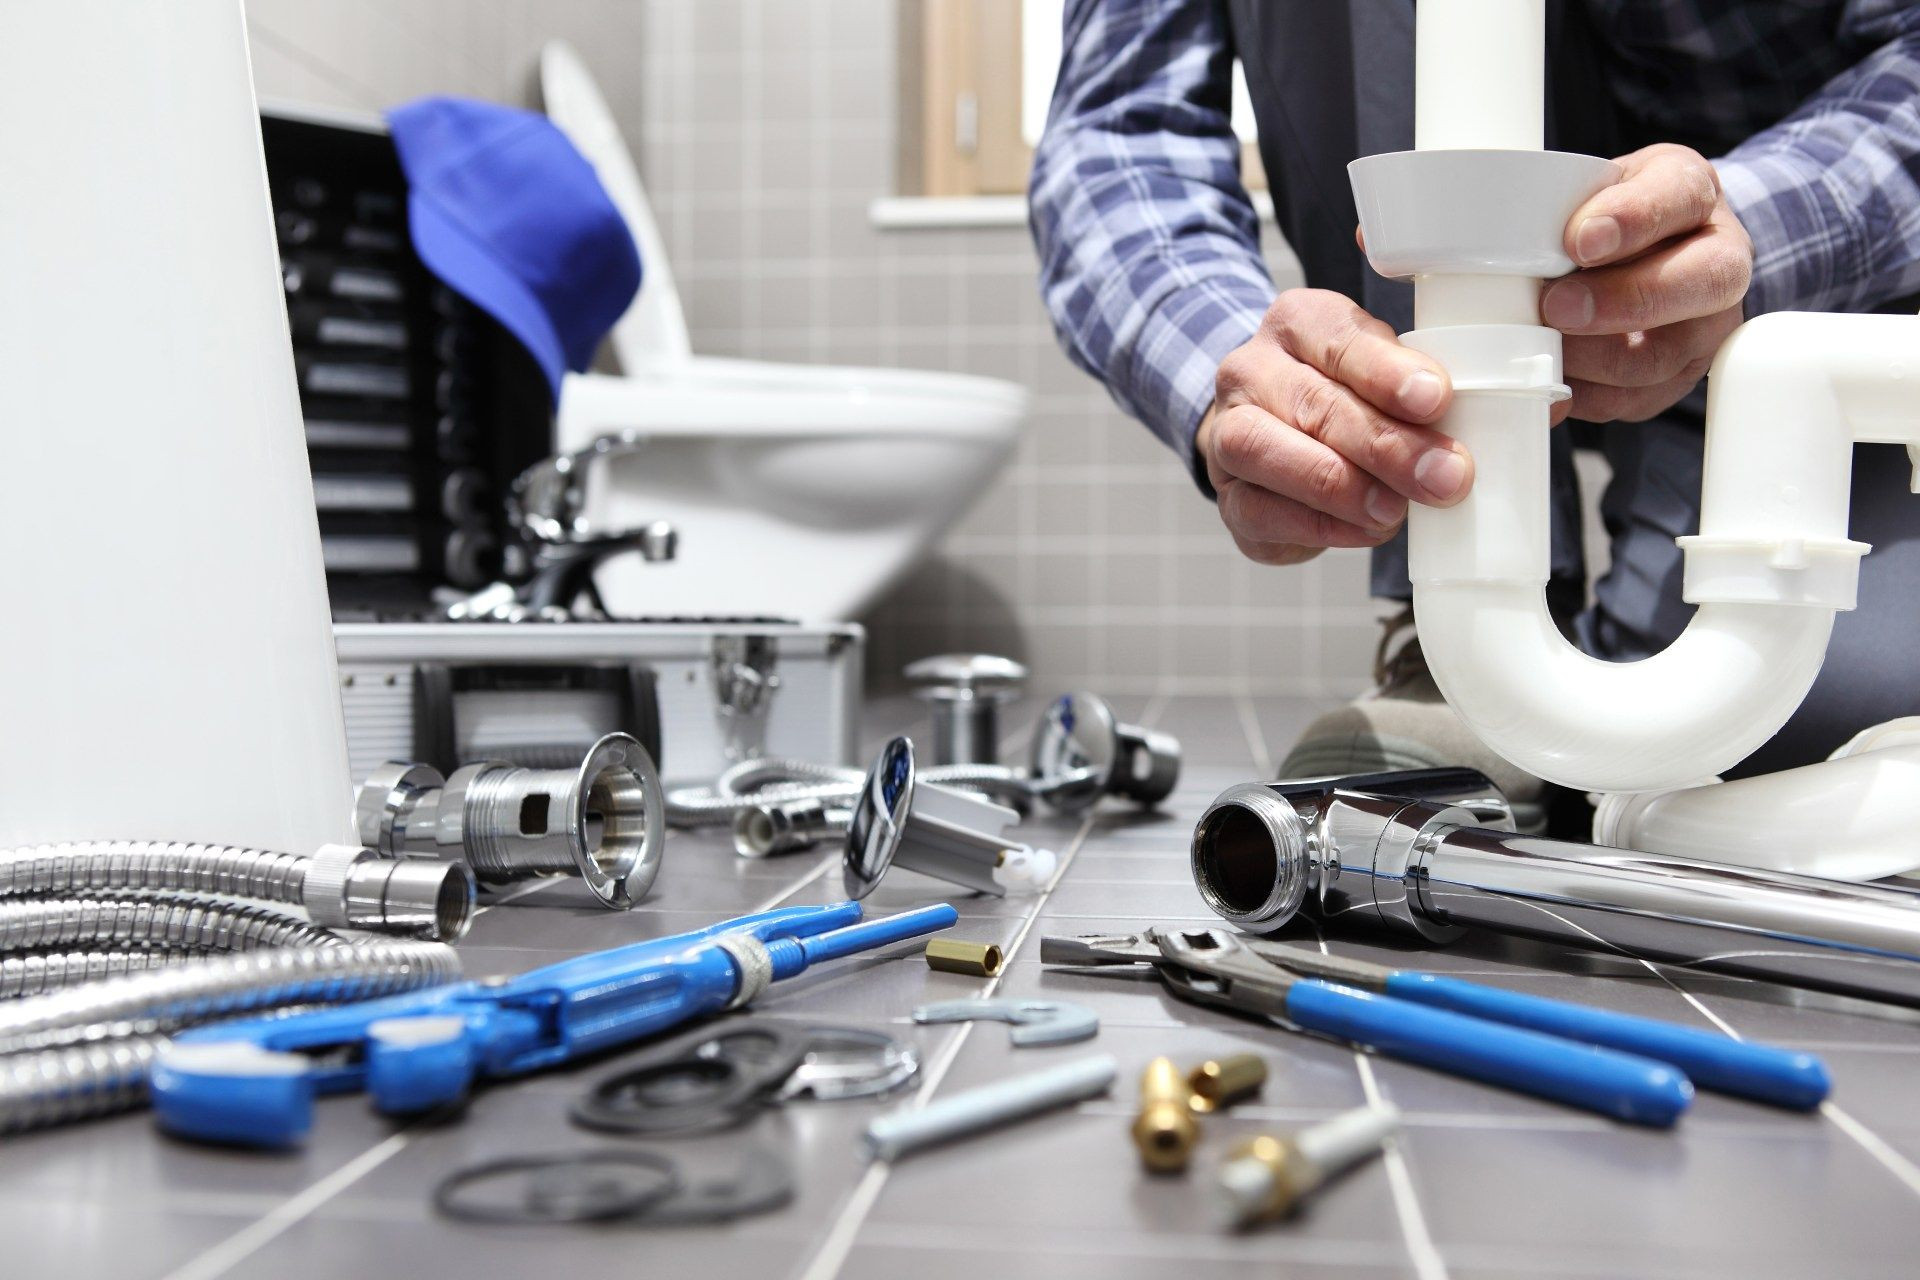 Plumbing and plumber service for kitchen and bathroom in Montreal, Westmount, Outreot, Rosemont, Kirkland, Dorval, Verdun, Lasalle, ... and surrounding areas / Montreal Decarie Plomberie